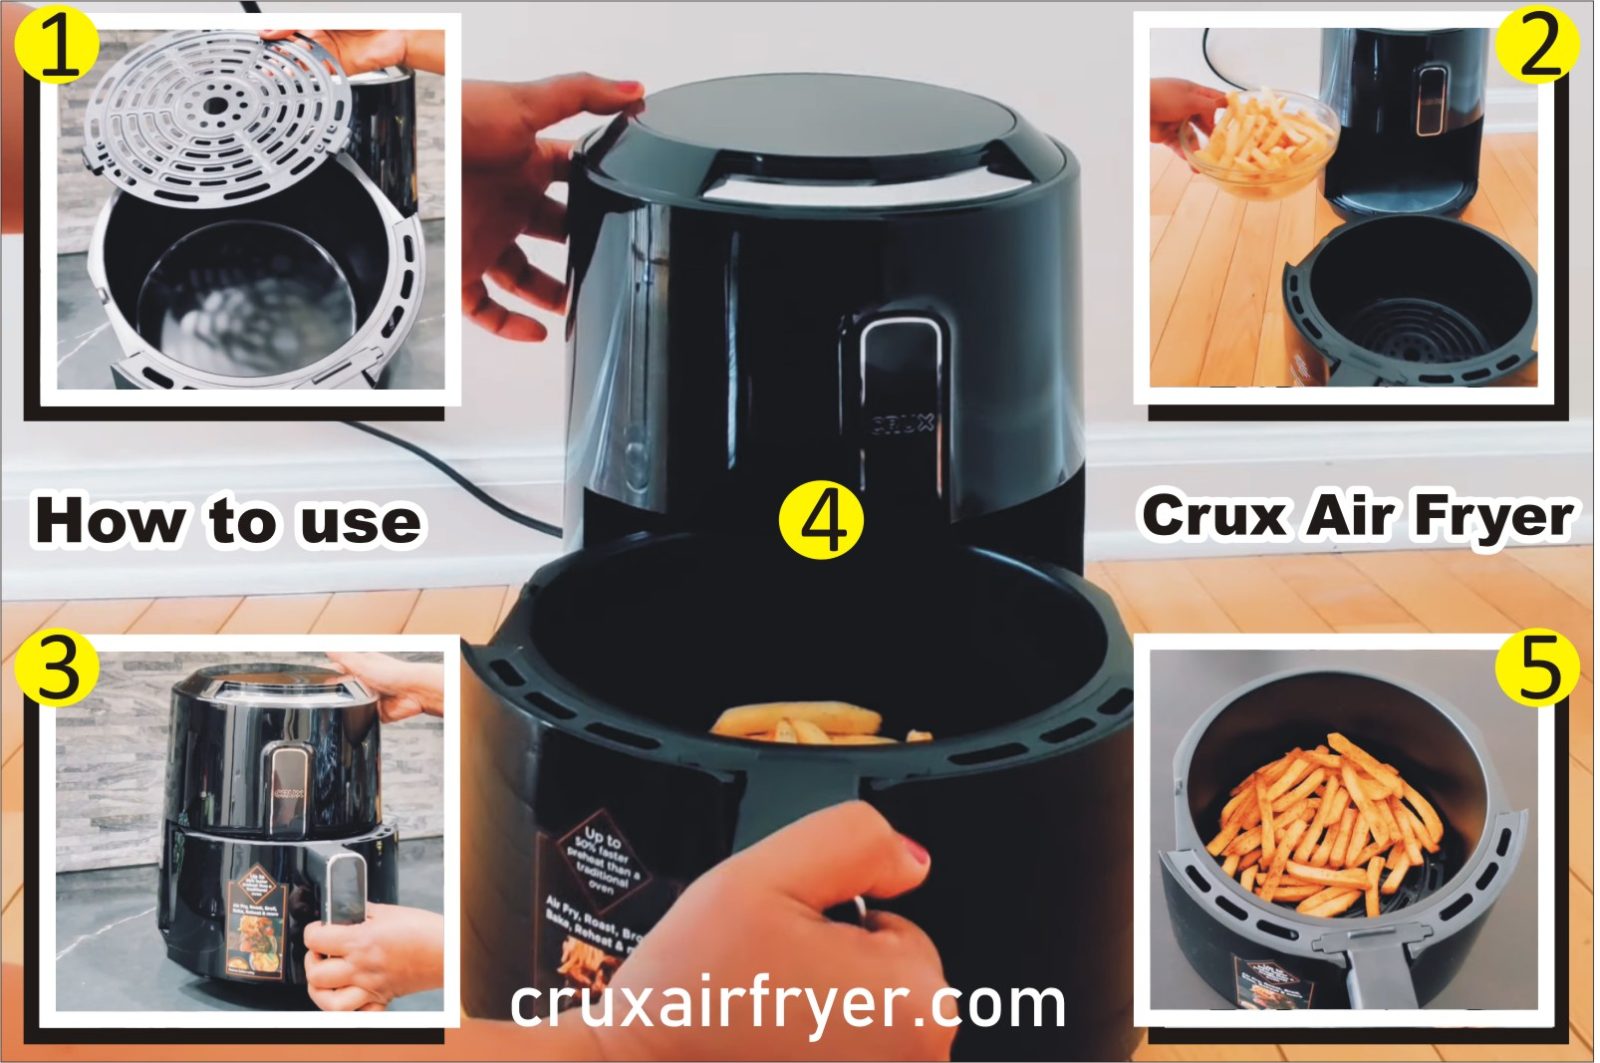 How to use Crux air fryer